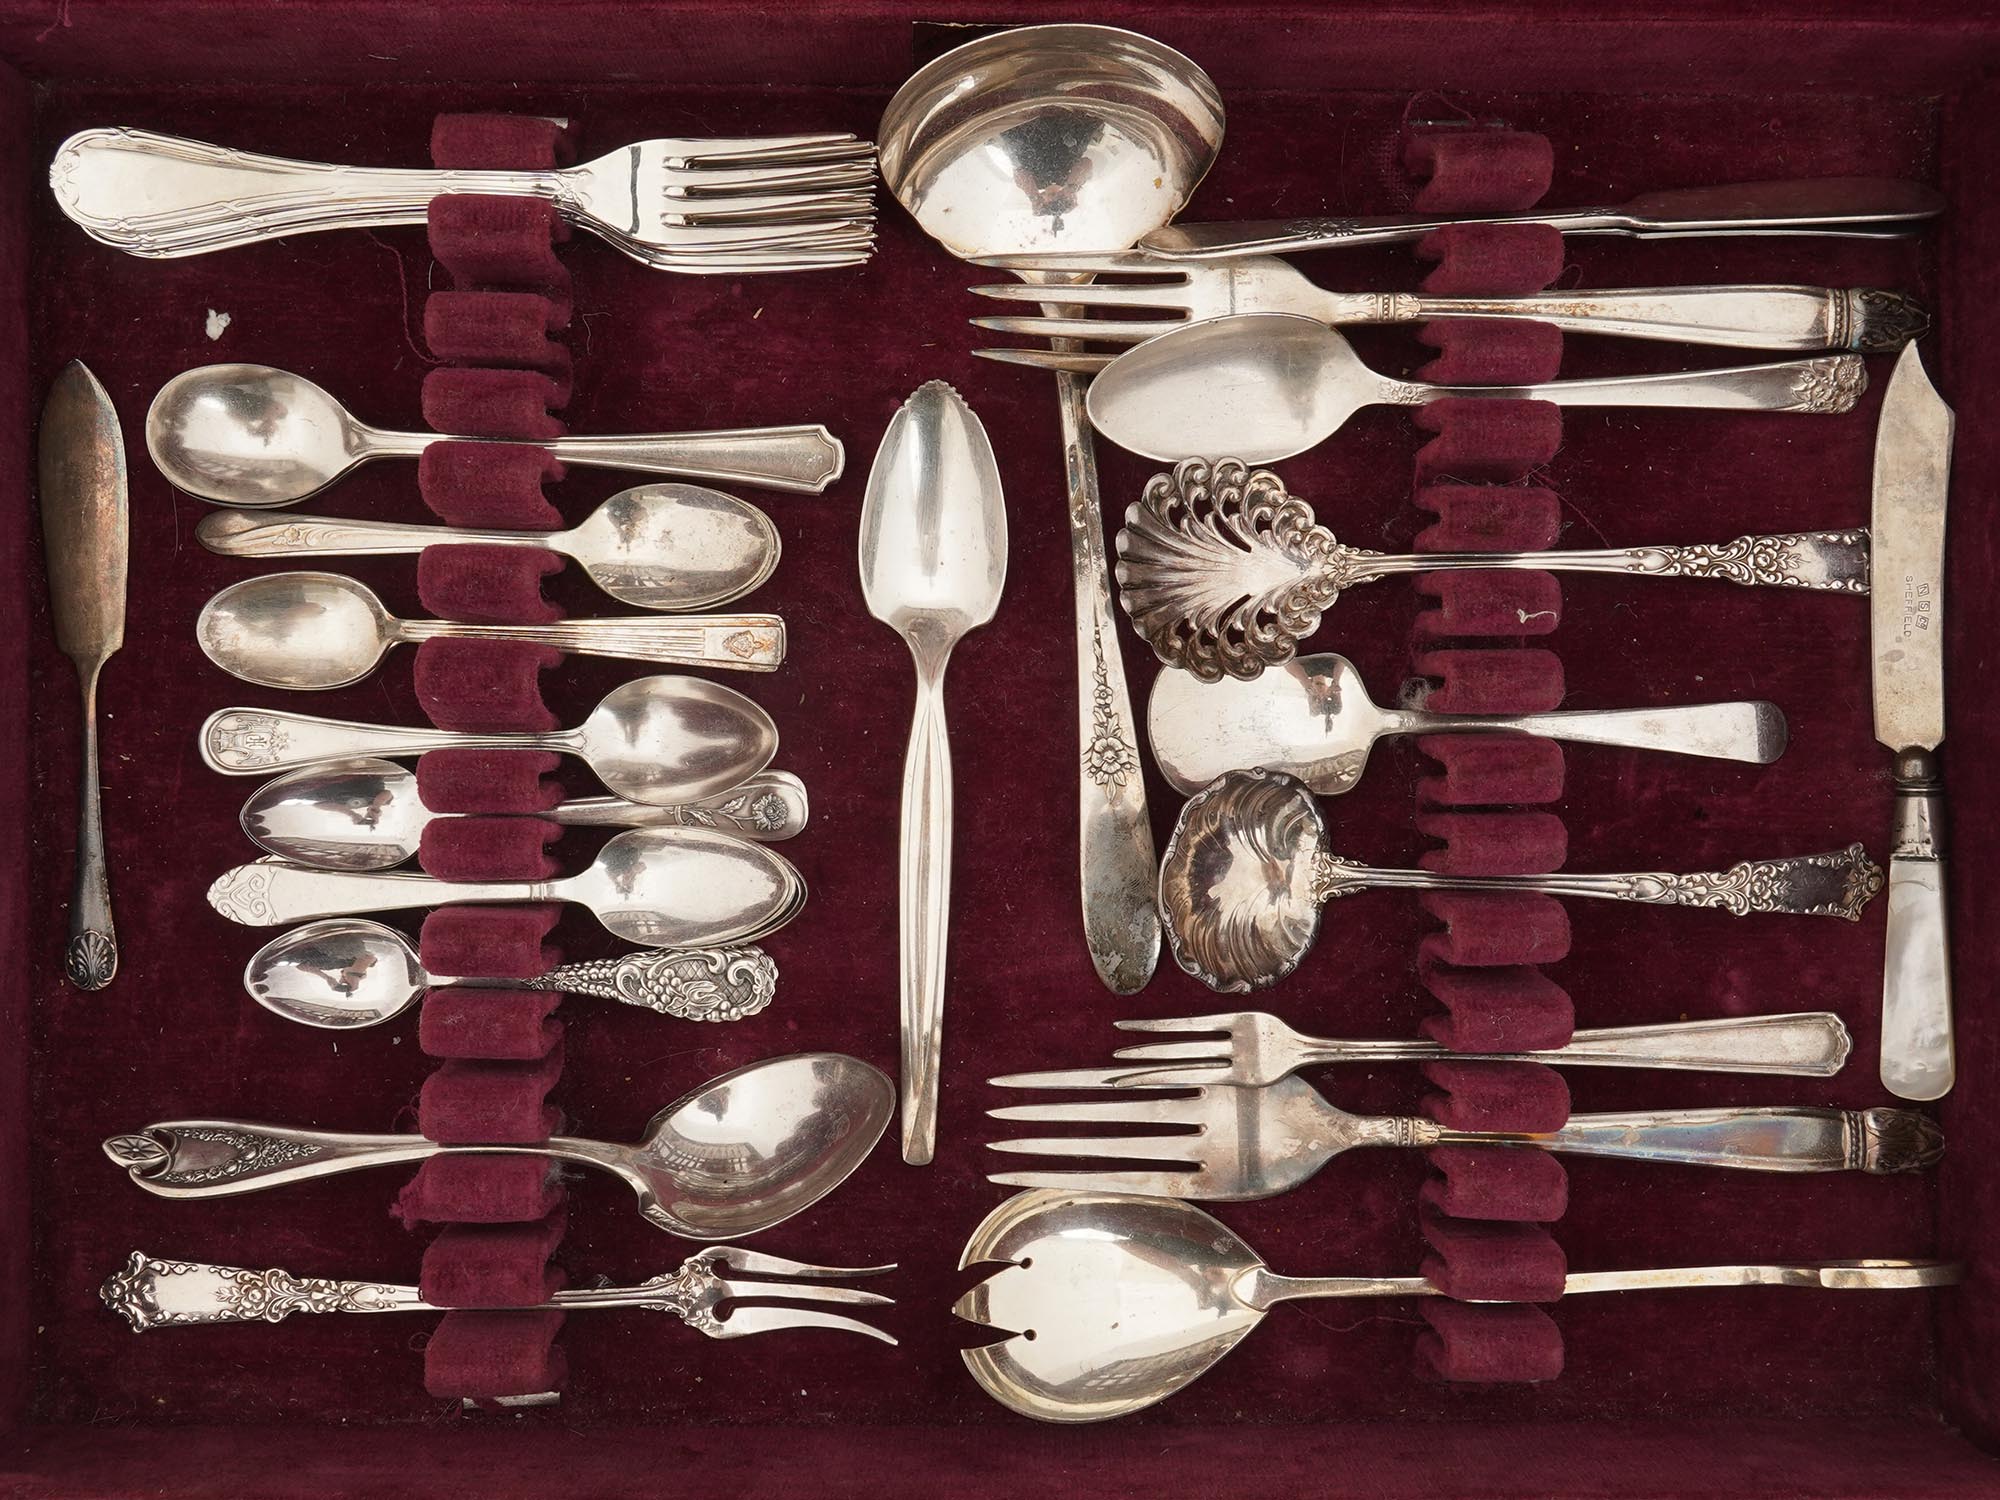 FOUR CUTLERY CASES WITH SILVERWARE BY ROGERS BROS PIC-2